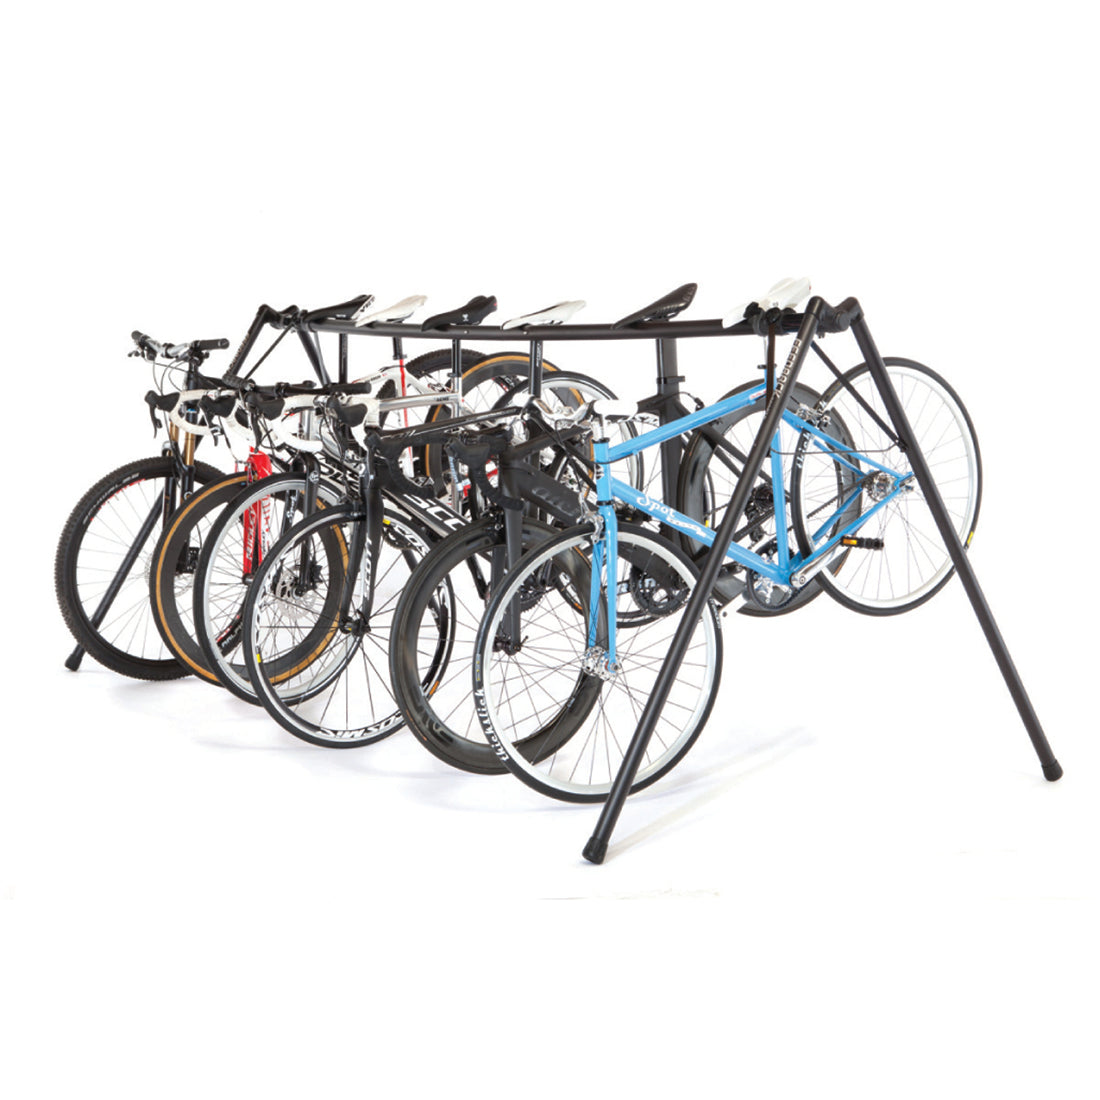 Feedback Sports A-Frame event bike storage stand loaded with bikes on white background.